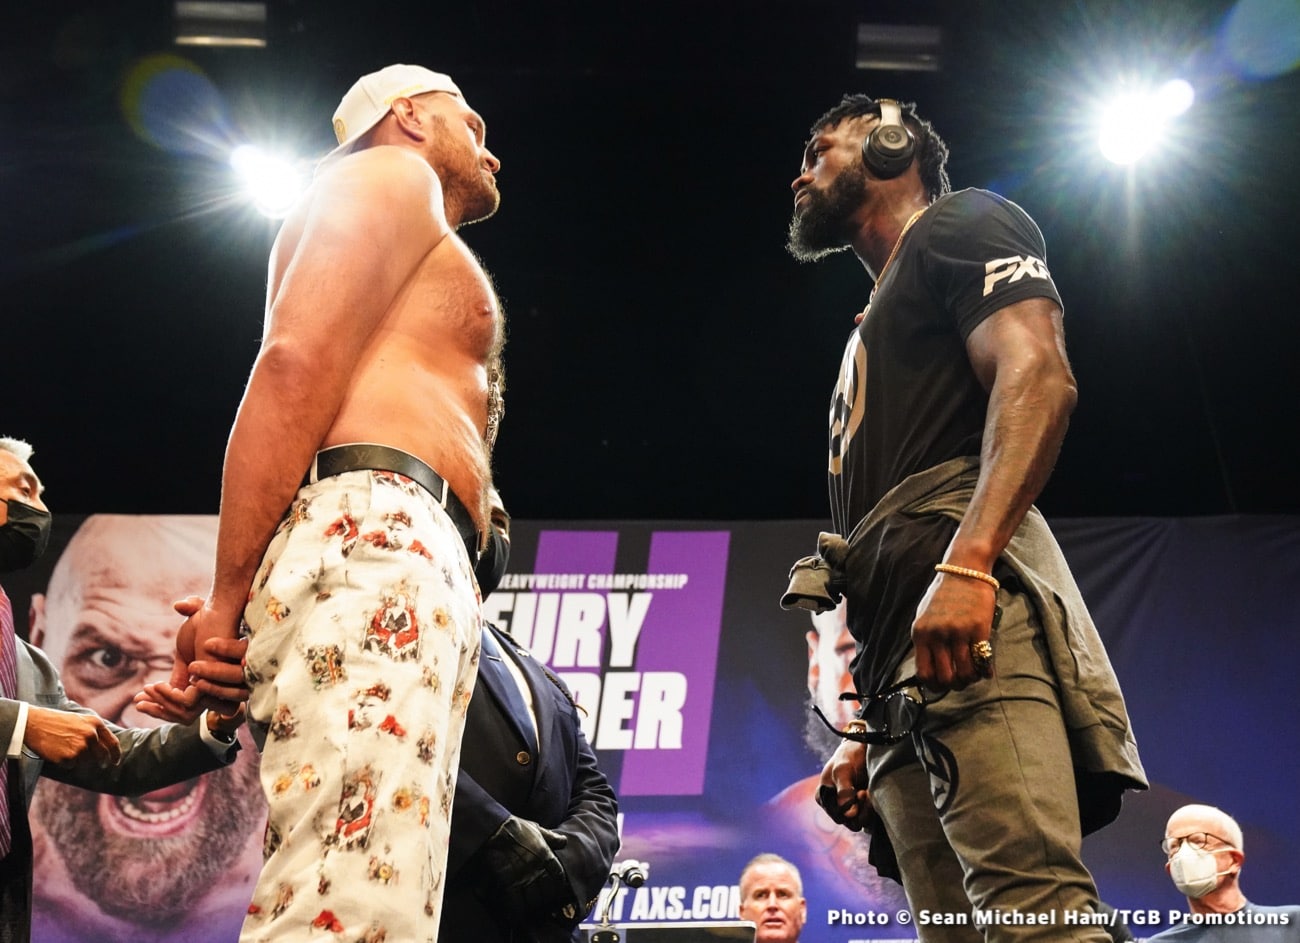 New Date Official For Fury-Wilder III: October 9 At T-Mobile Arena In Las Vegas